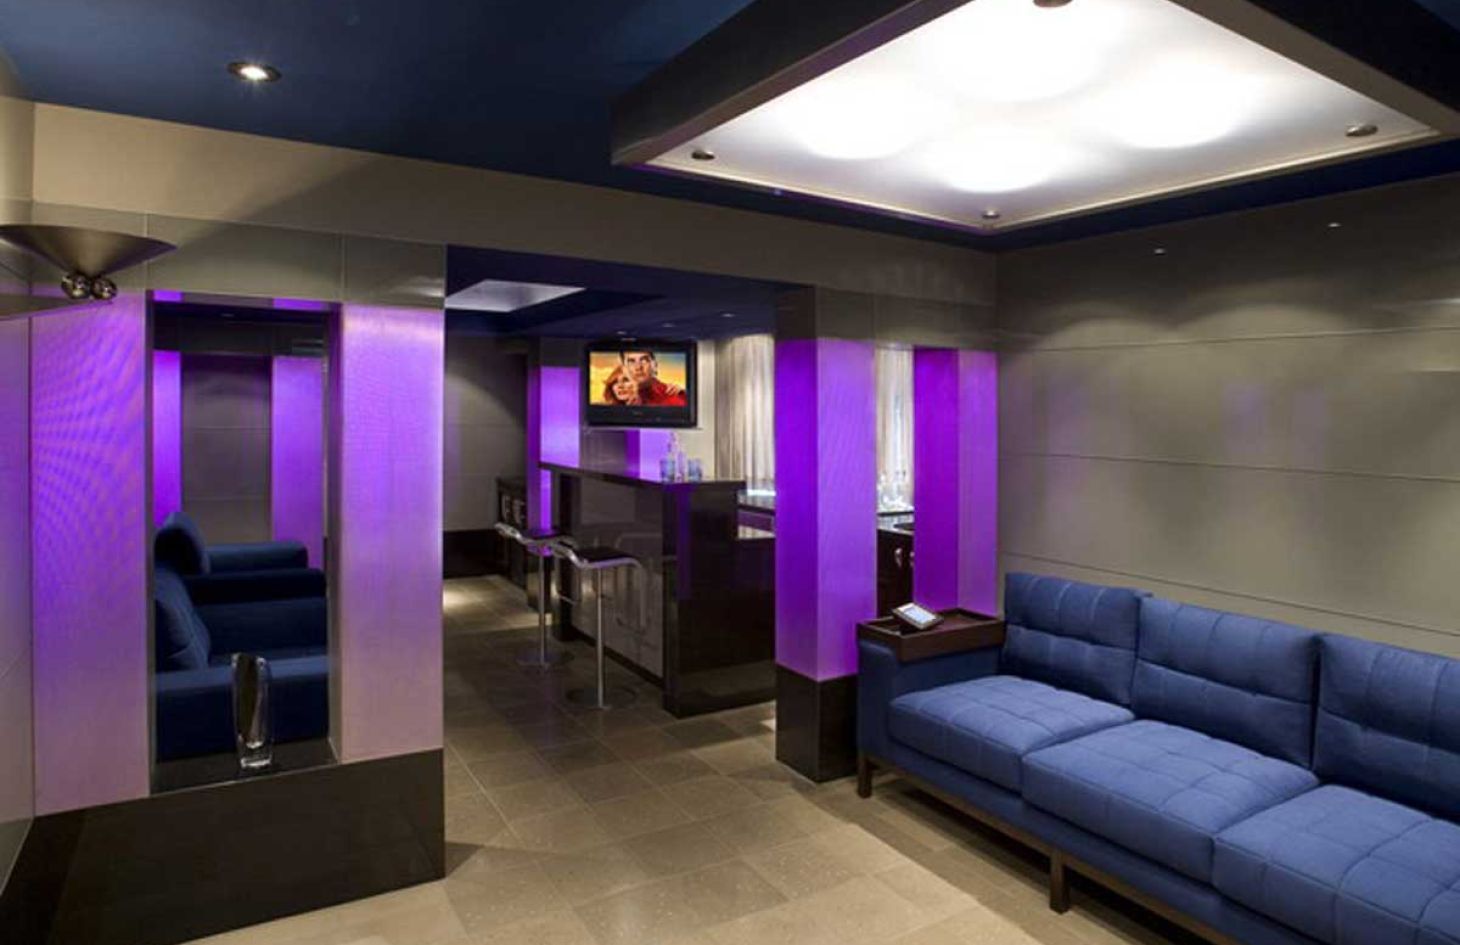 Home Theater Design, Future Home, LED Lighting, Sitting Area